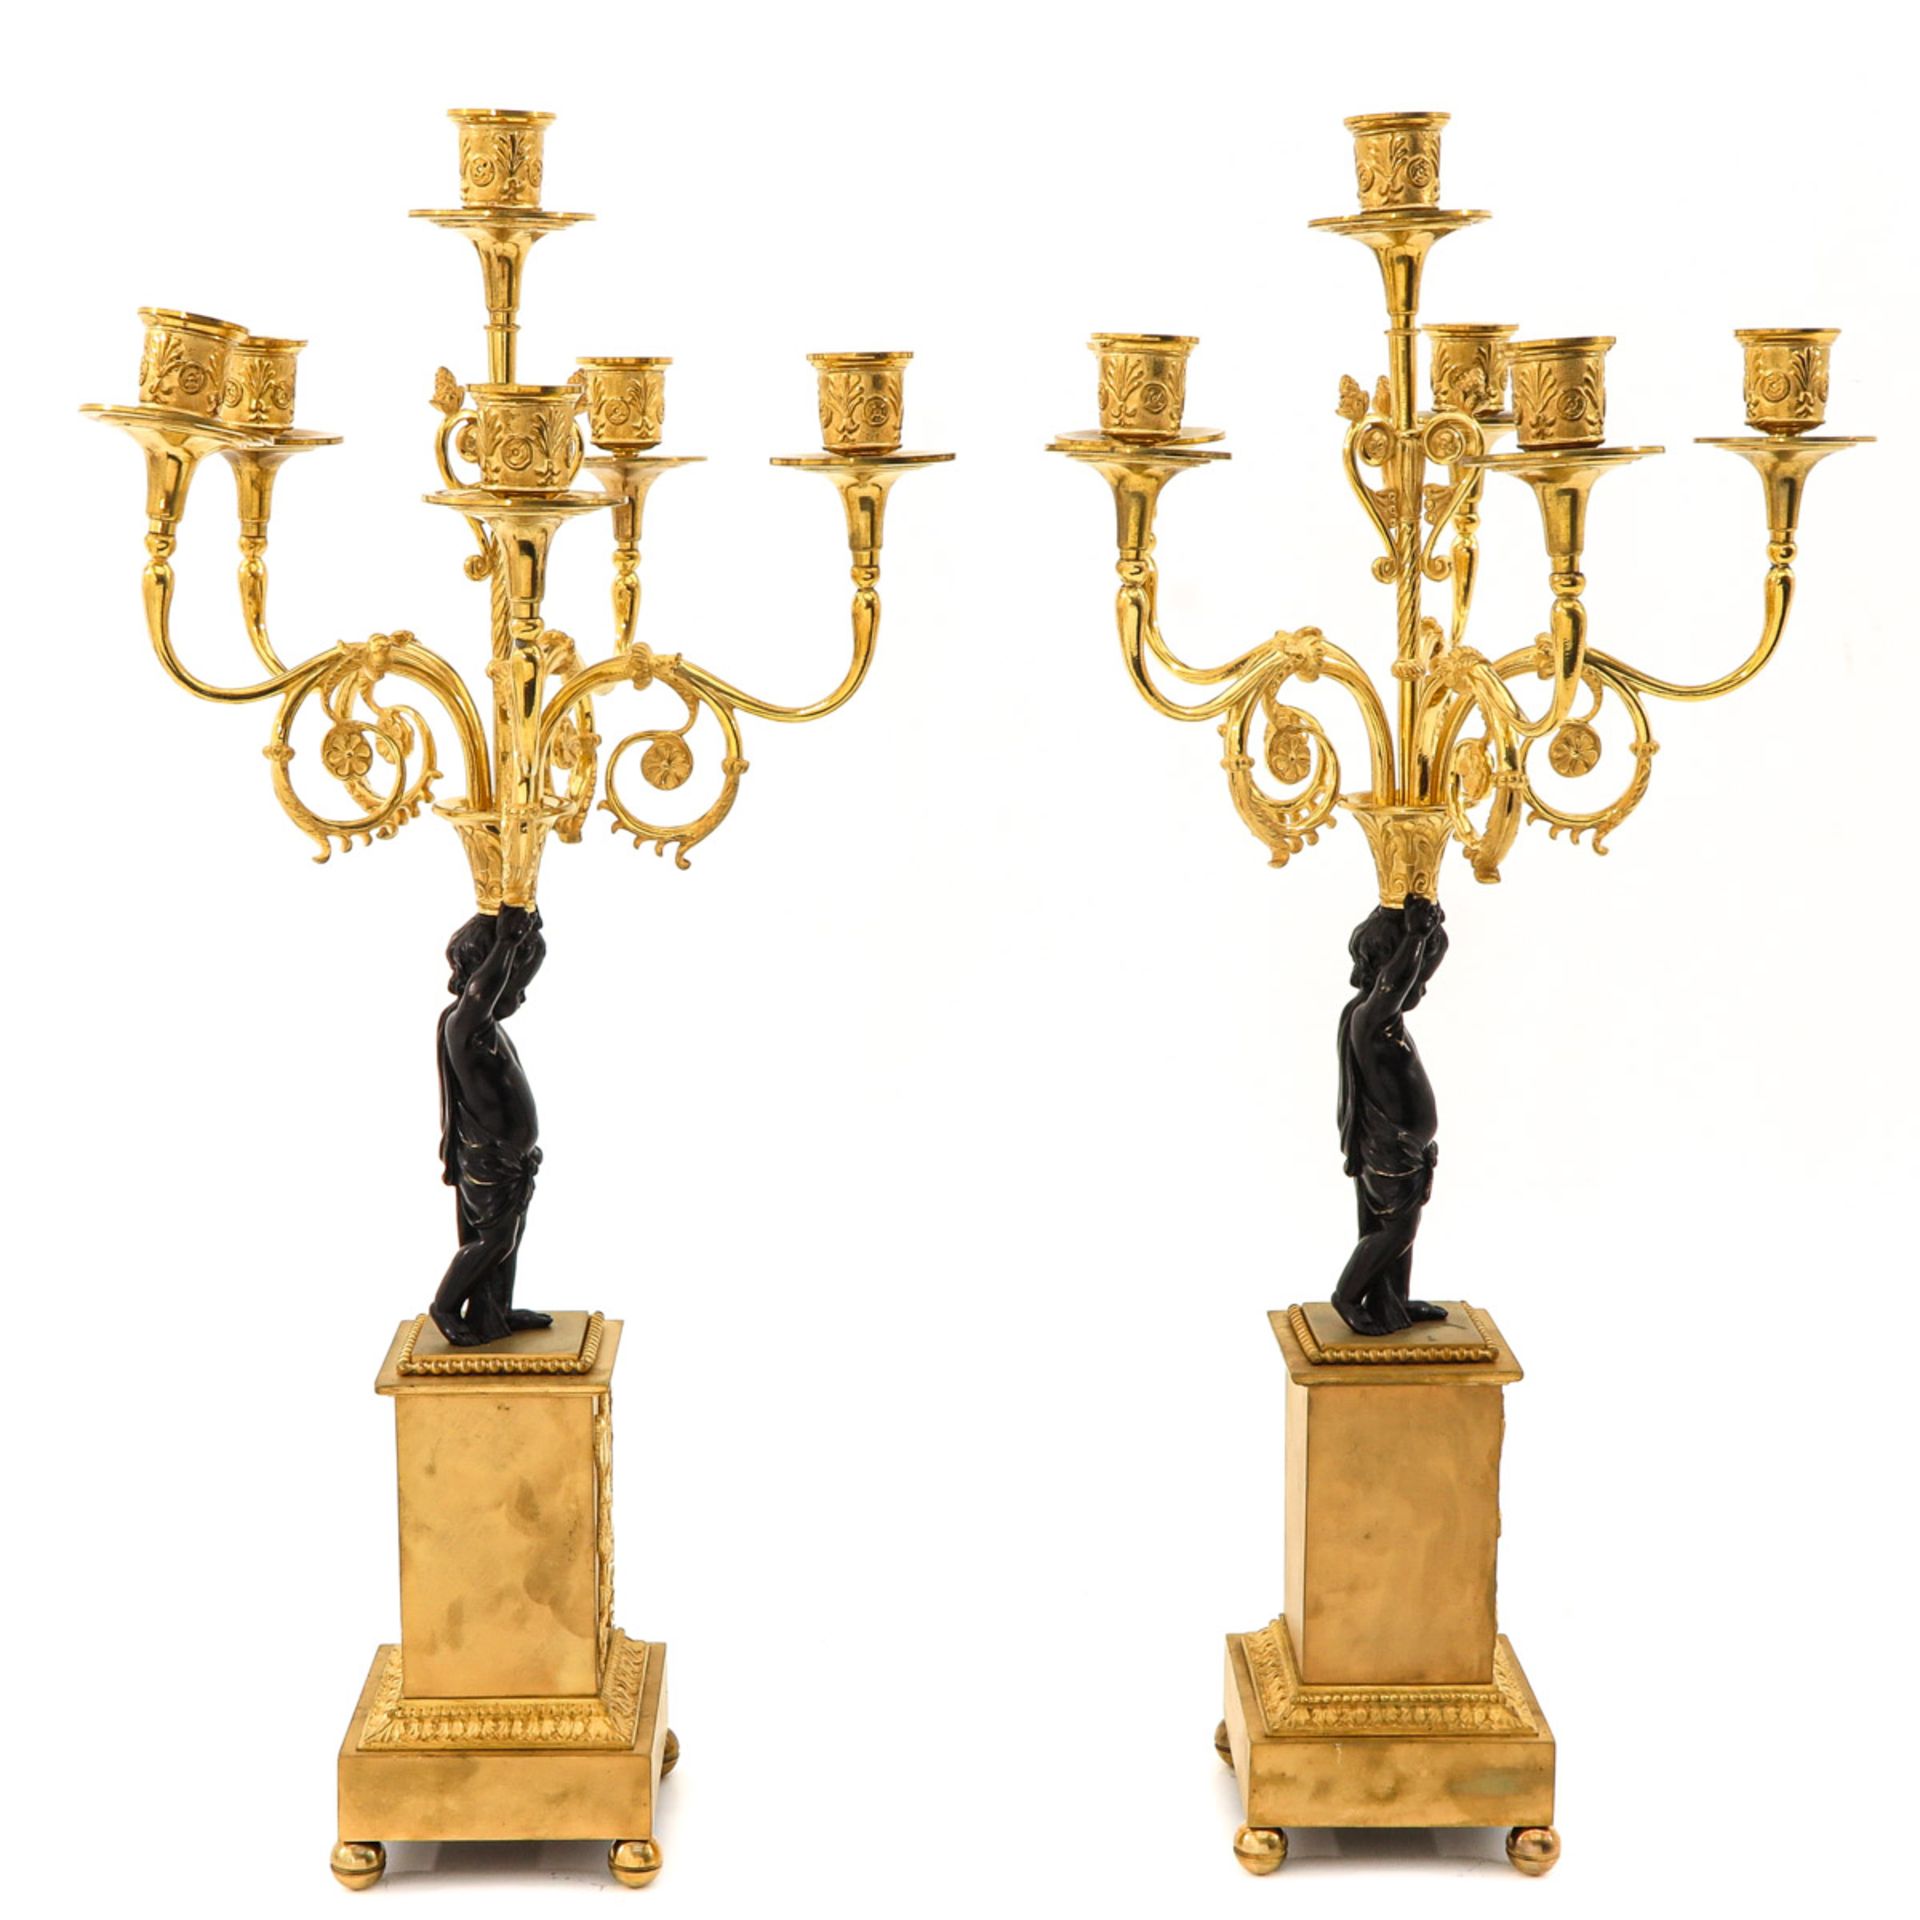 A Pair of Candlesticks - Image 4 of 9